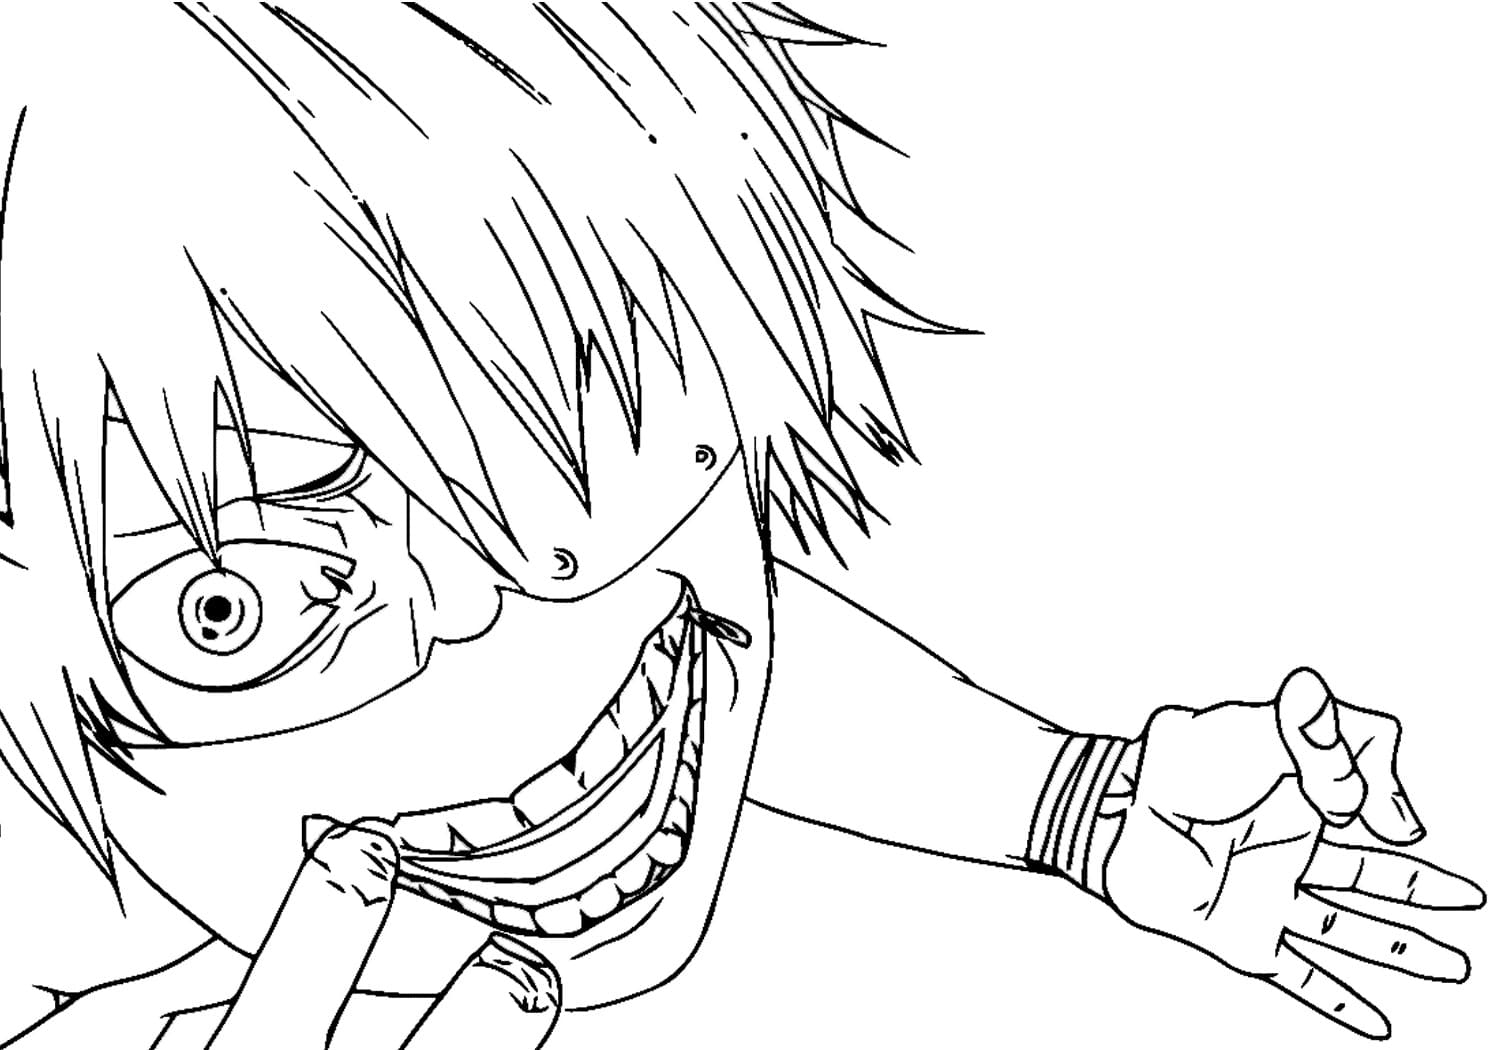 Tokyo Ghoul Coloring Pages - Print and Color | WONDER DAY — Coloring ...